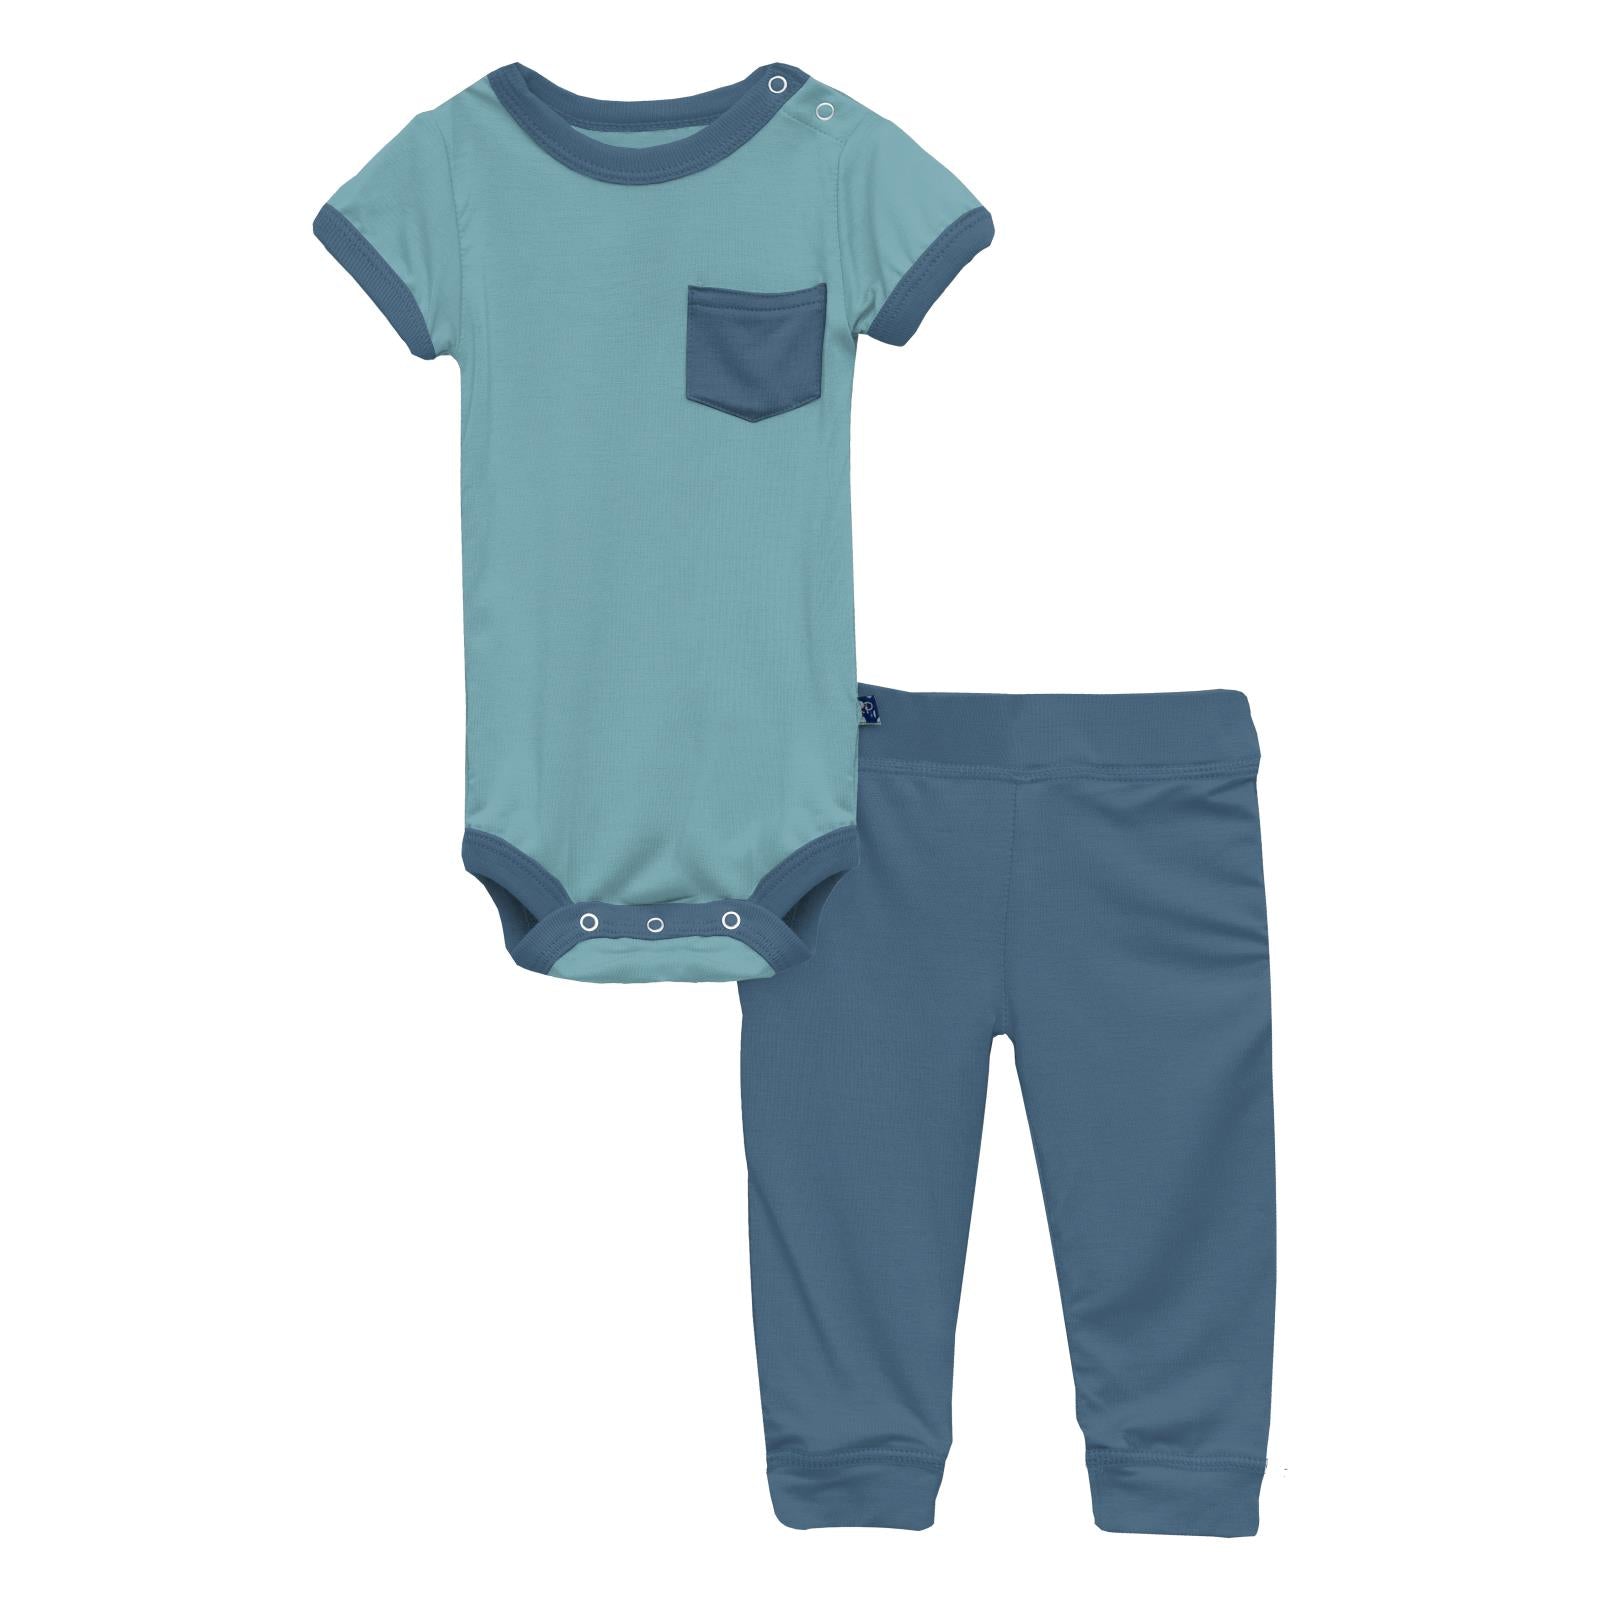 Kickee Pants Short Sleeve Pocket One Piece & Pants Outfit Set in Glacier with Twilight